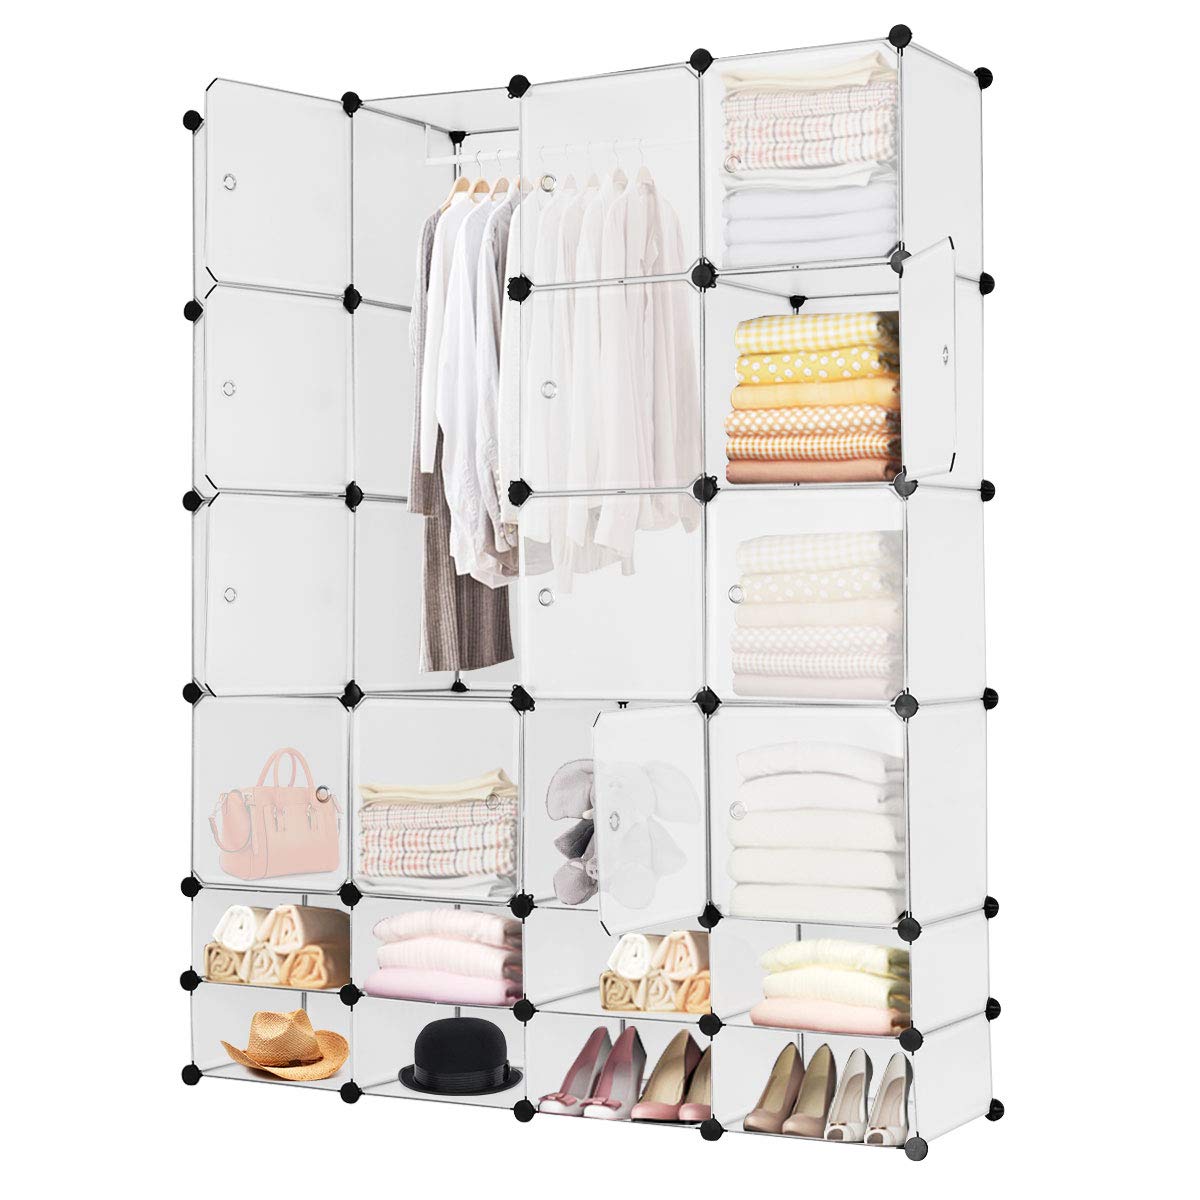 Tangkula 16 Cubes Portable Wardrobe Closet, Combination Bedroom Dresser  Armoire with Hanging Sections, Cube Storage Organizer for Hanging Clothes,  DIY